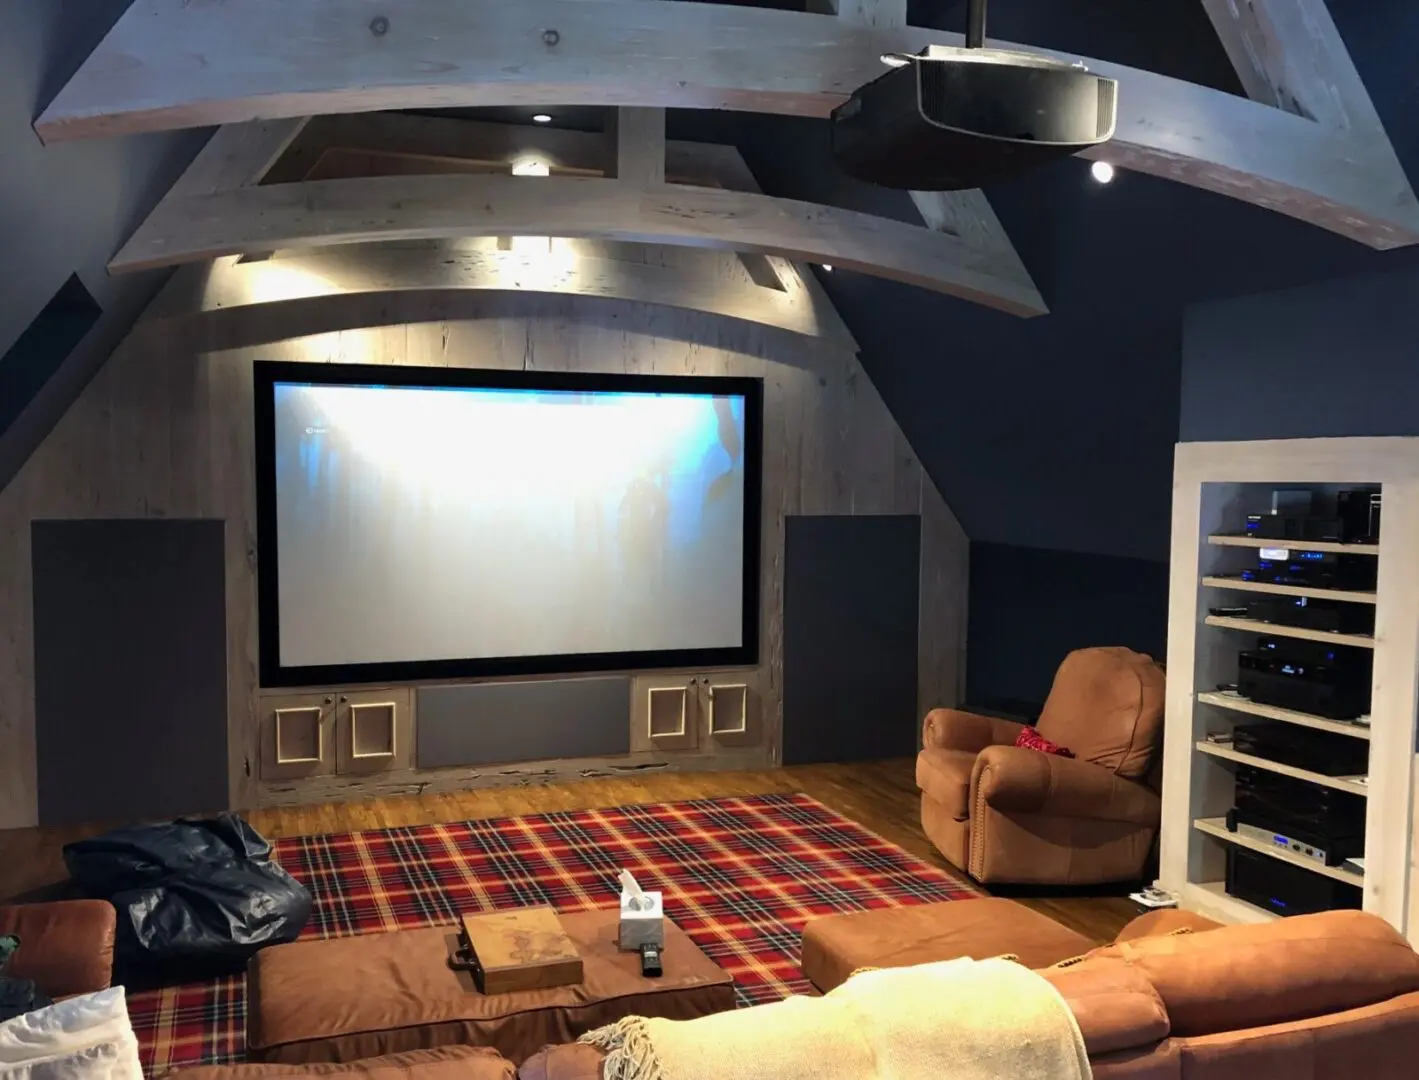 The Sound Station in Bartlesville client's new Hi-Fi Theater System